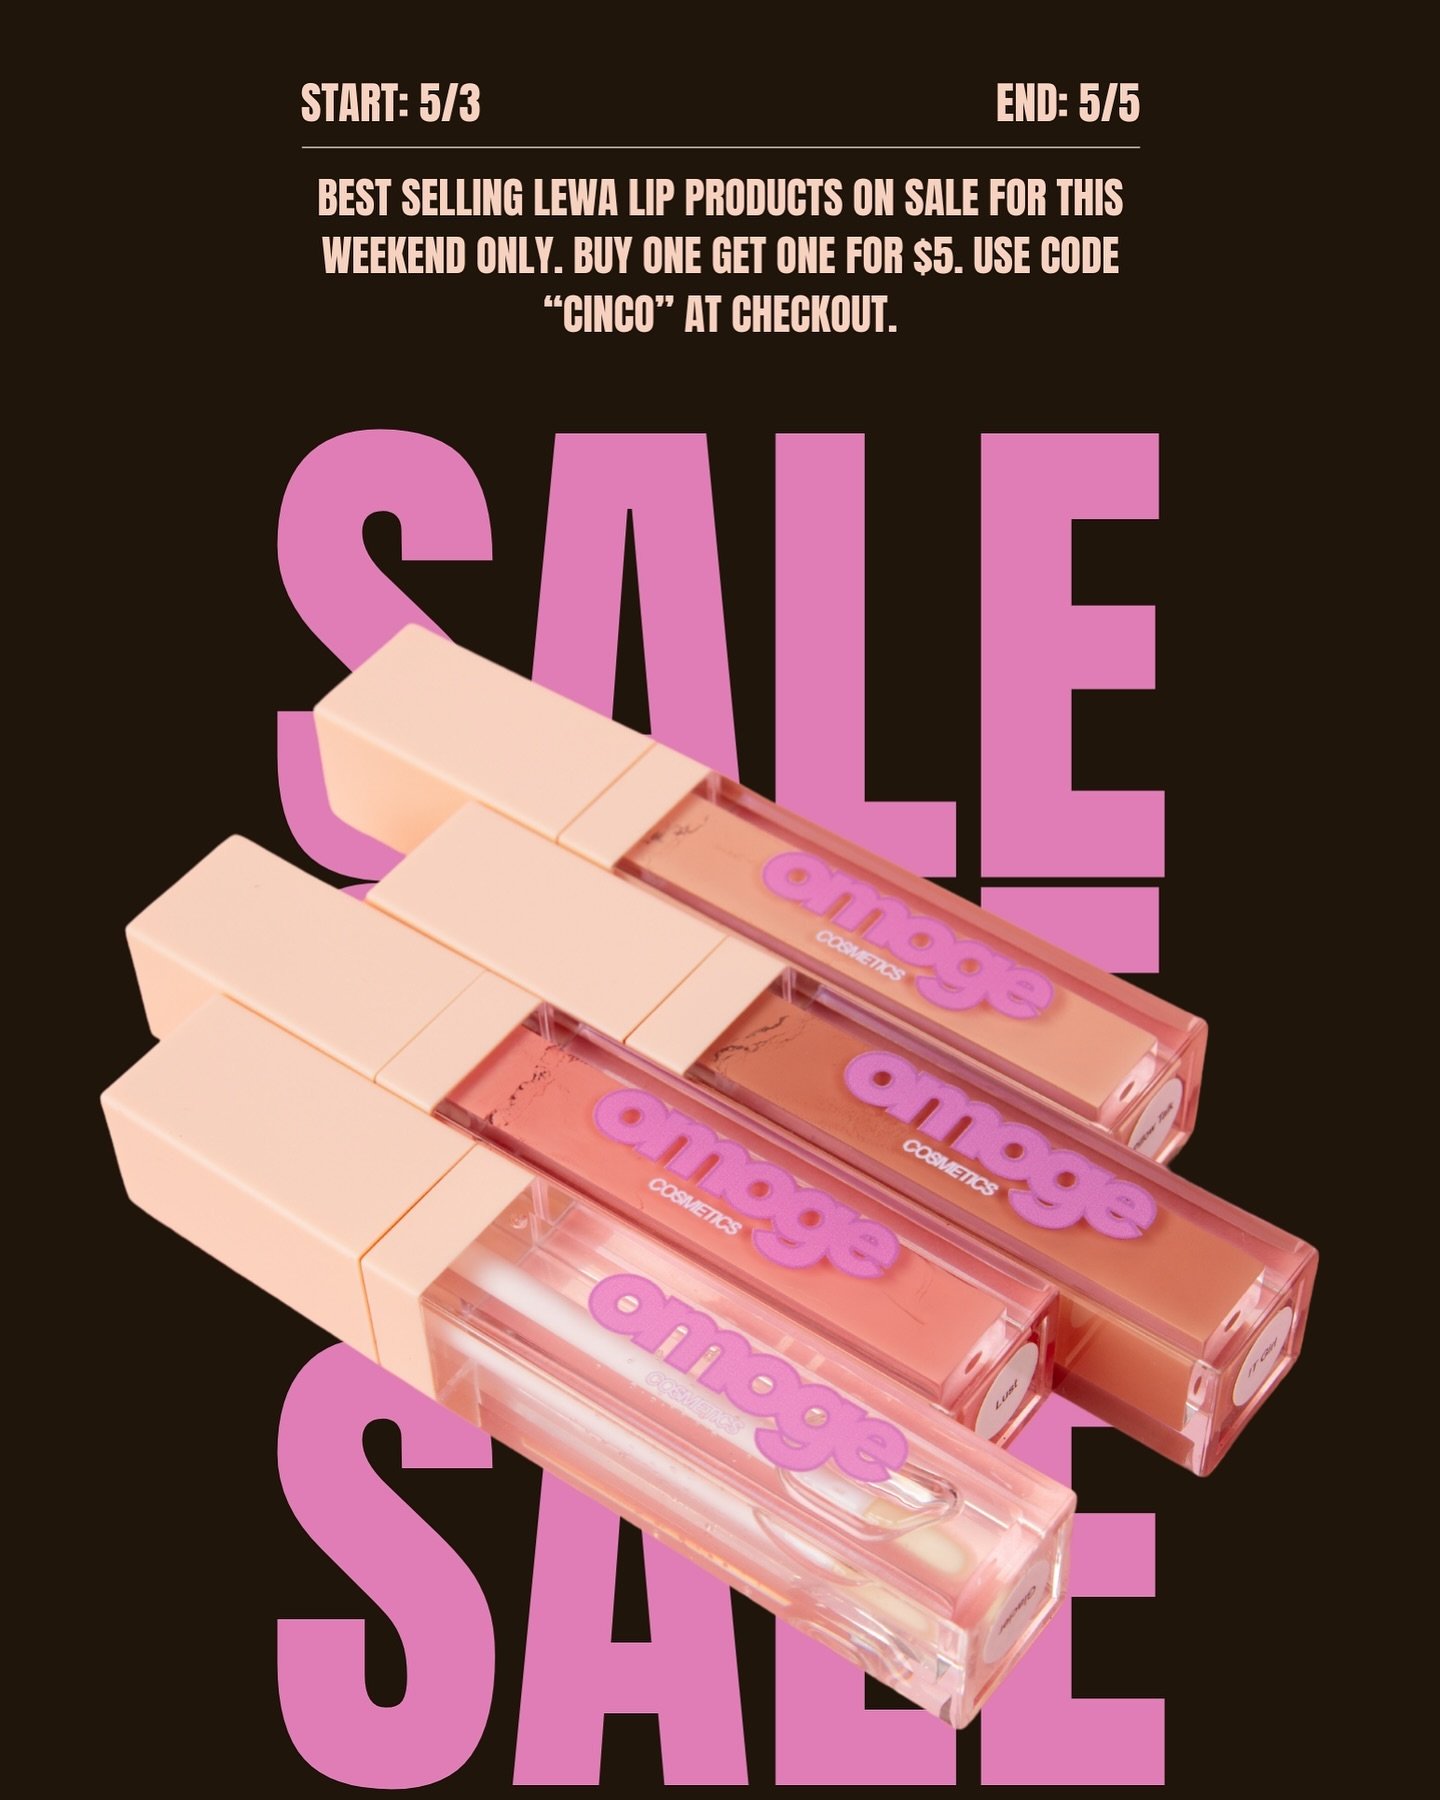 Enjoy a BOGO sale on our best selling lip products! For this weekend only Buy One Get One for $5 on our Lewa Lip Glosses 🫦

Use code &ldquo;CINCO&rdquo; at checkout 🦄